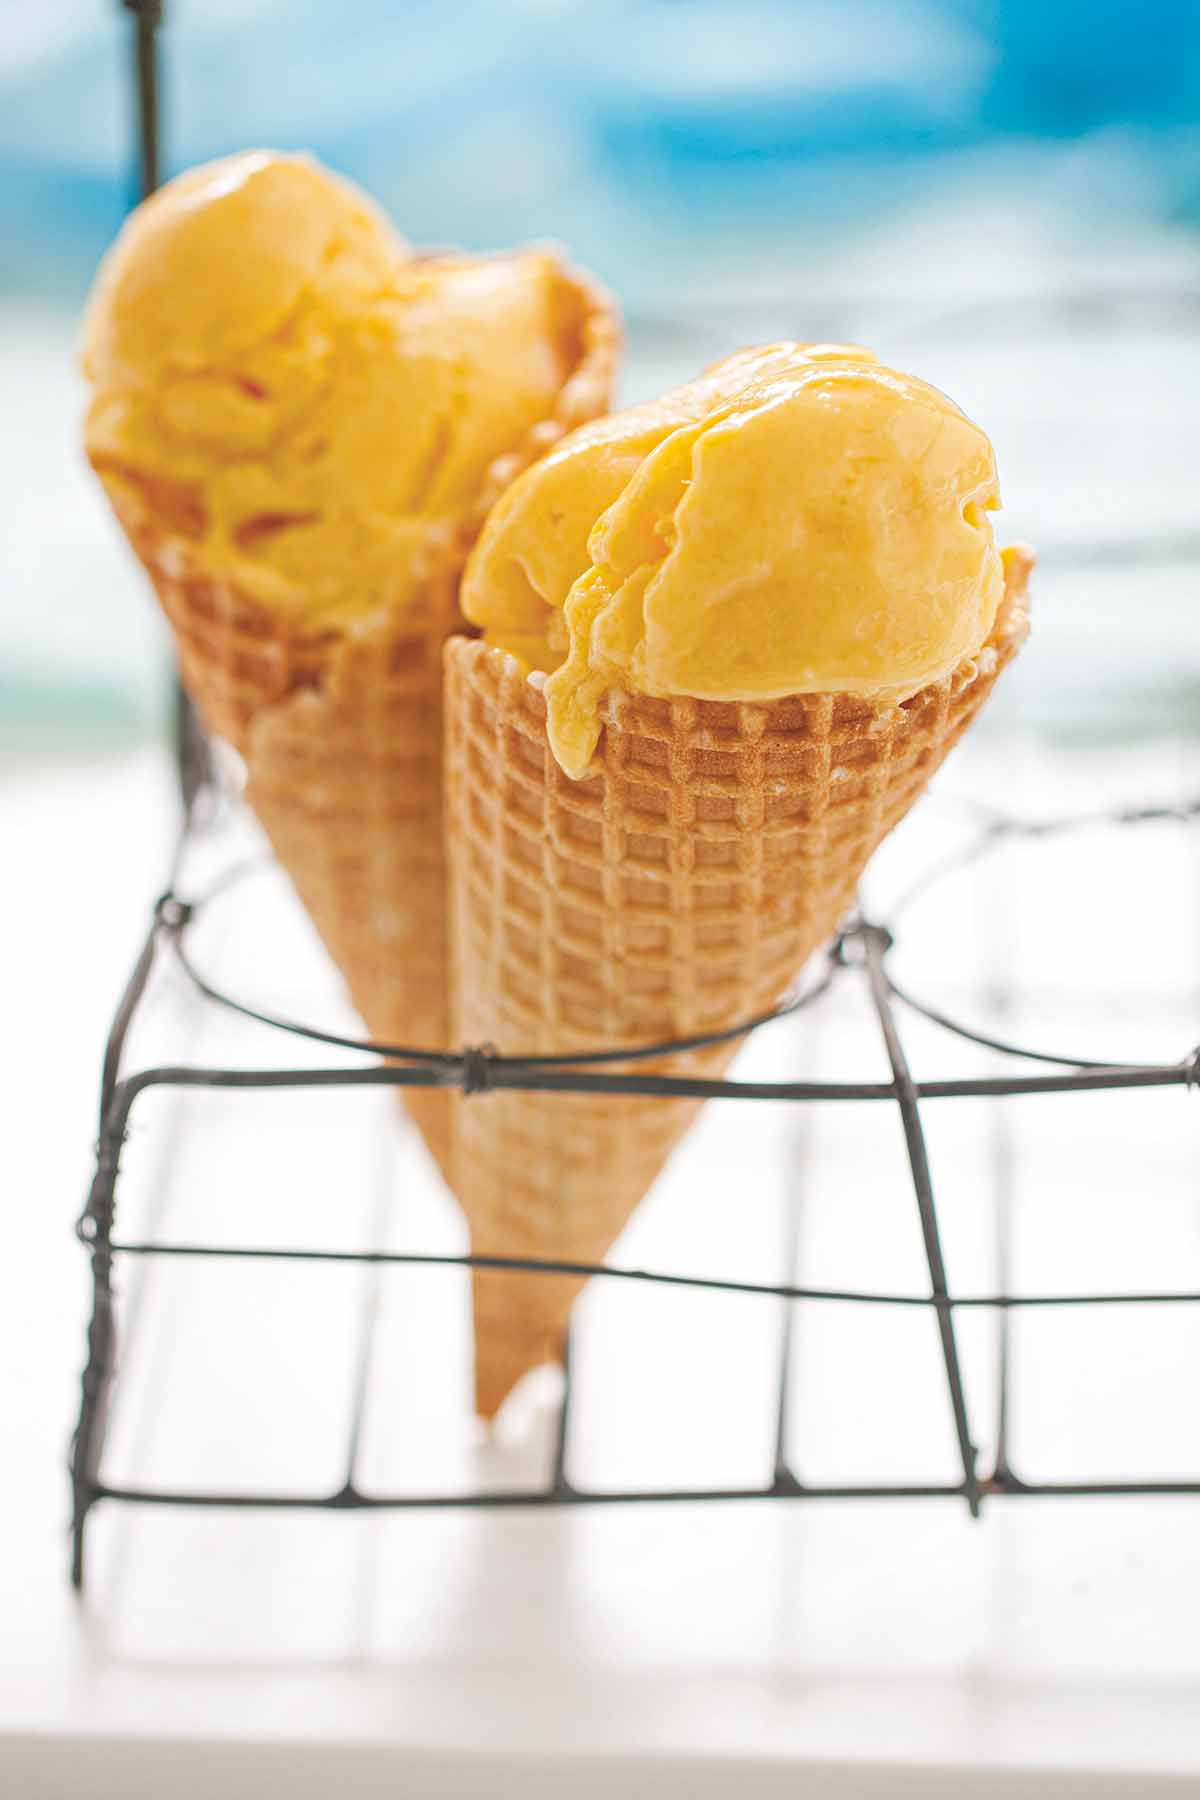 Two waffle cones filled with mango frozen yogurt propped up in a metal rack.